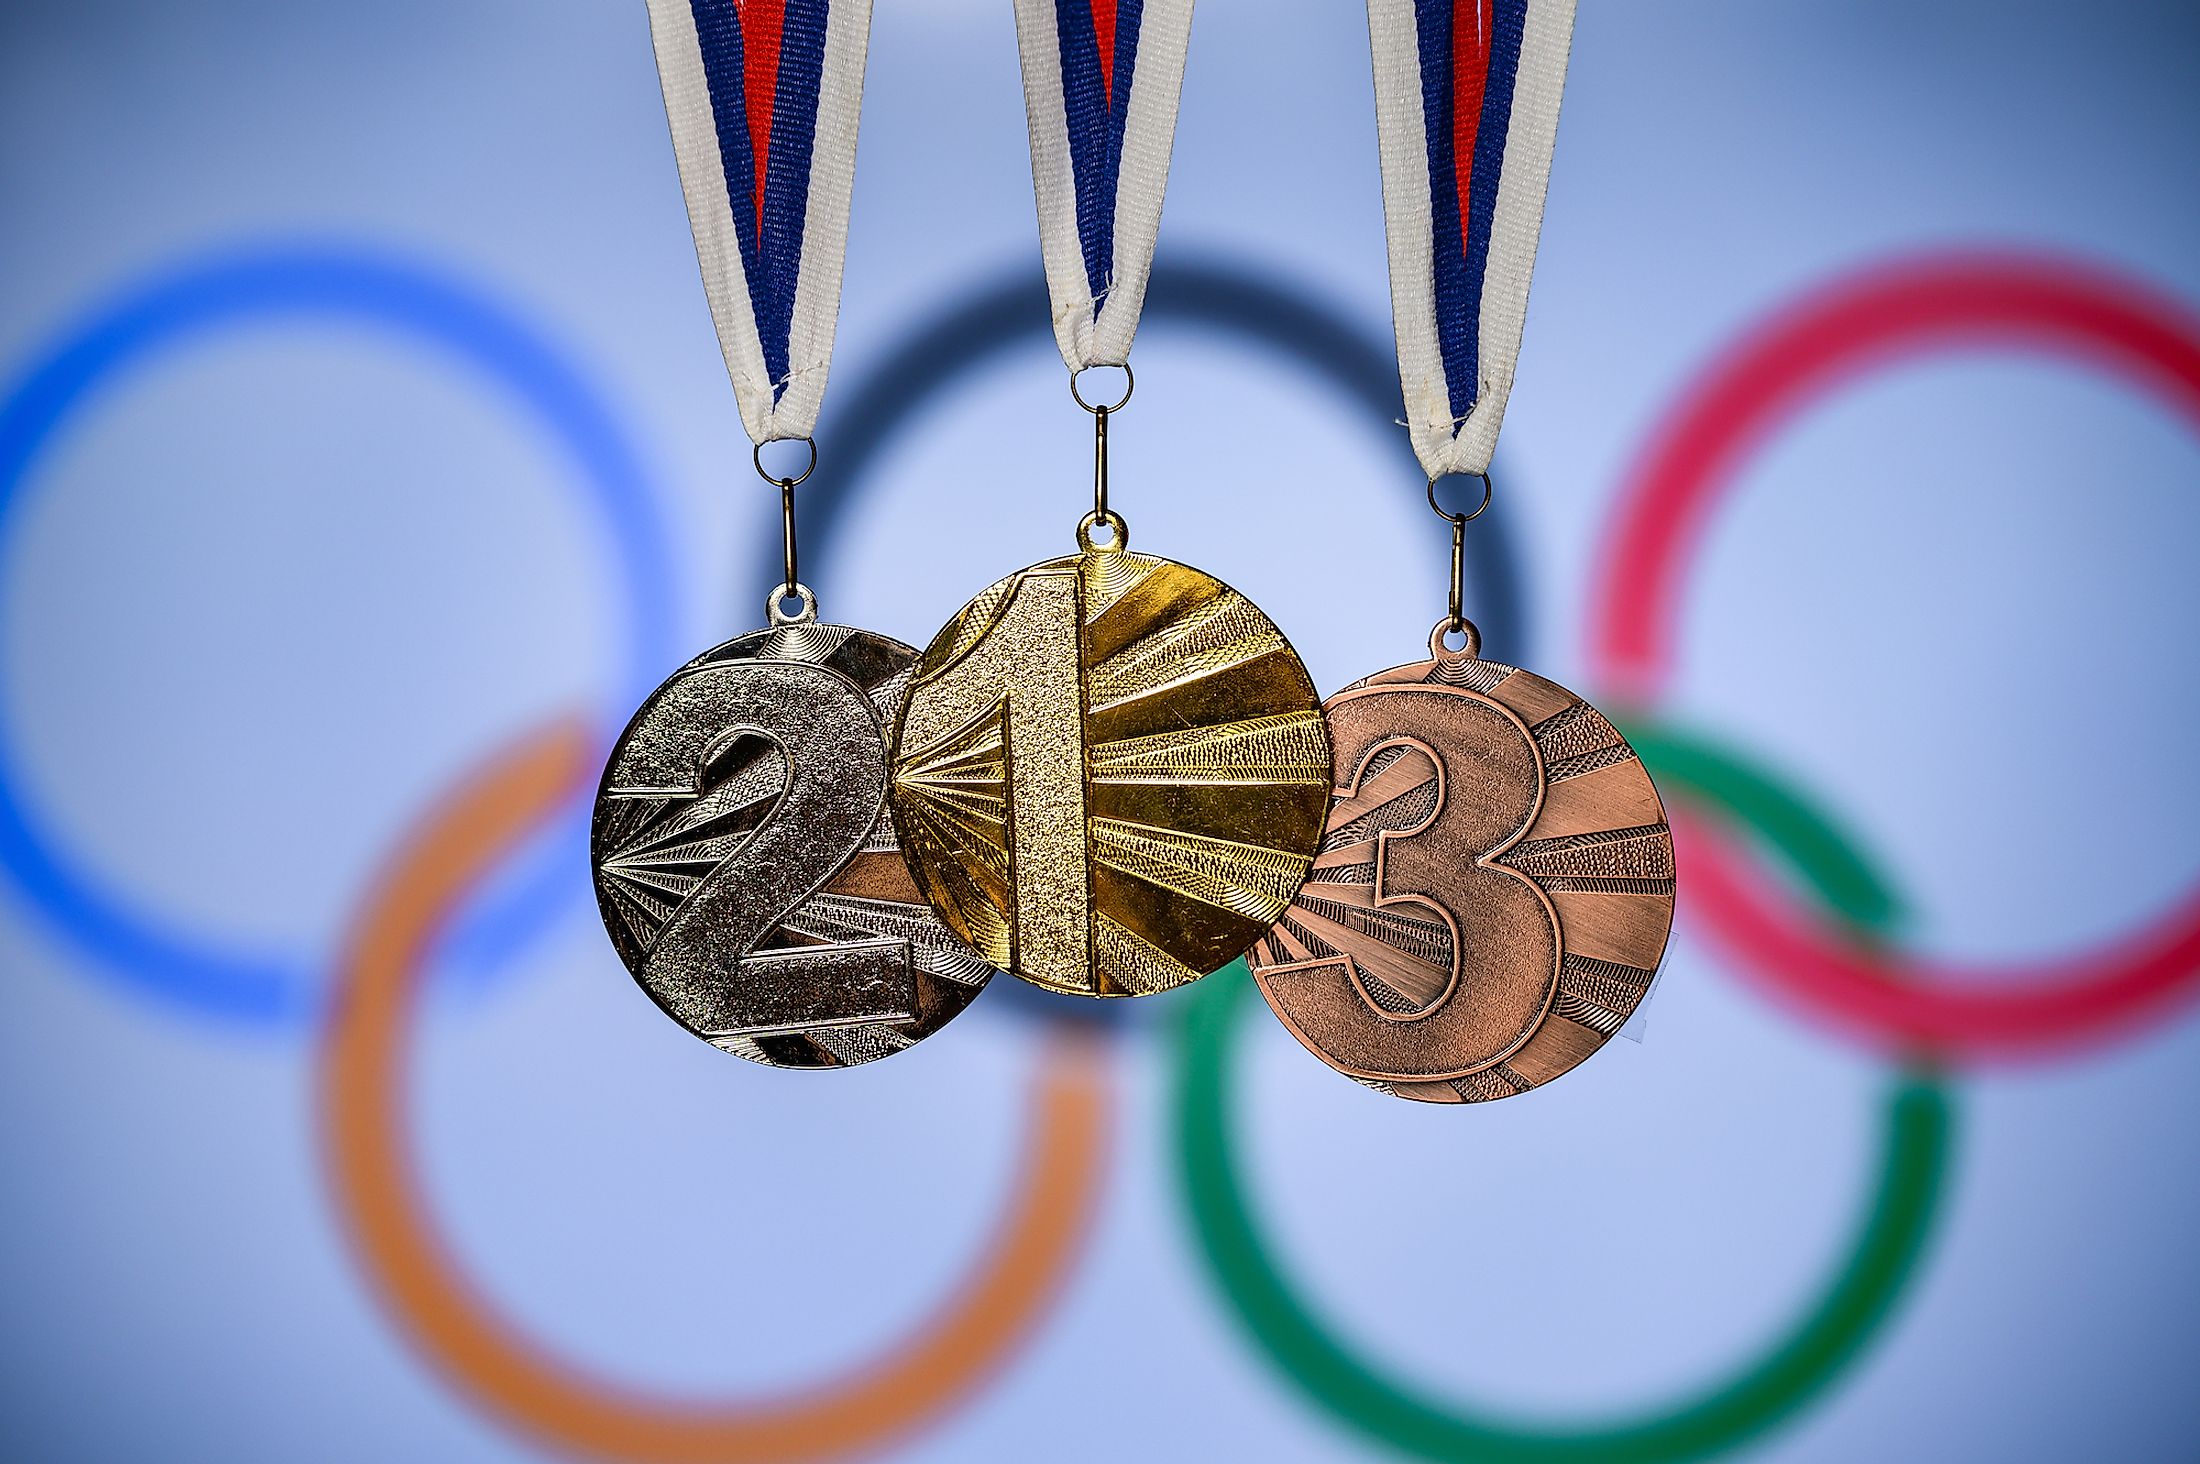 The coveted medals of Olympic Games. Editorial credit: kovop58 / Shutterstock.com